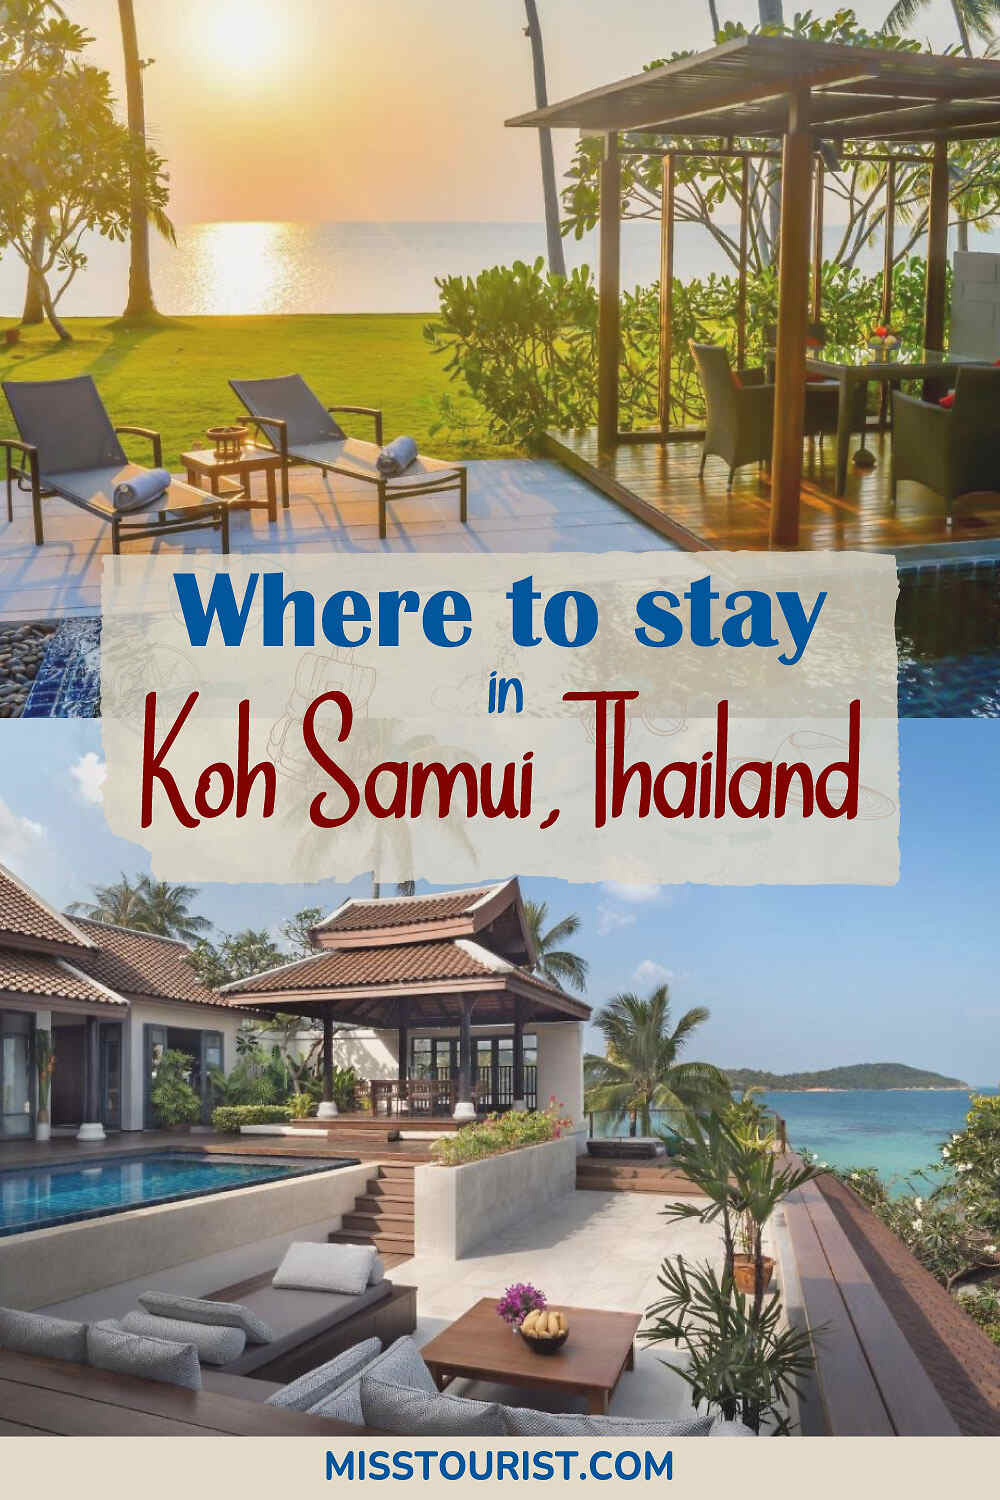 Where to Stay in Koh Samui Pin 2